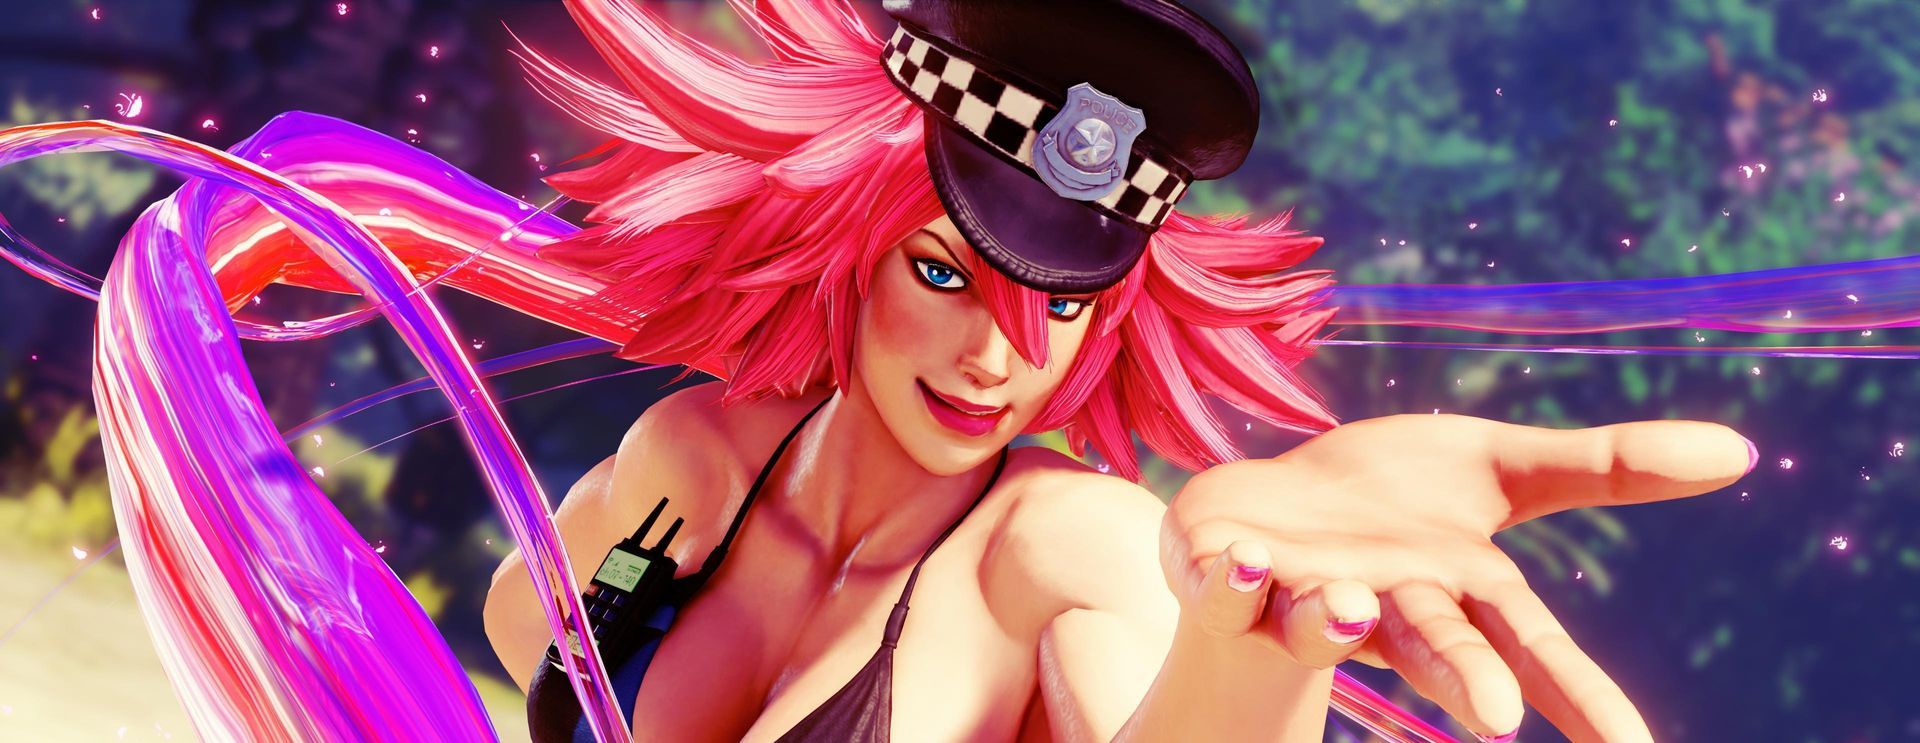 20 best pink hair characters